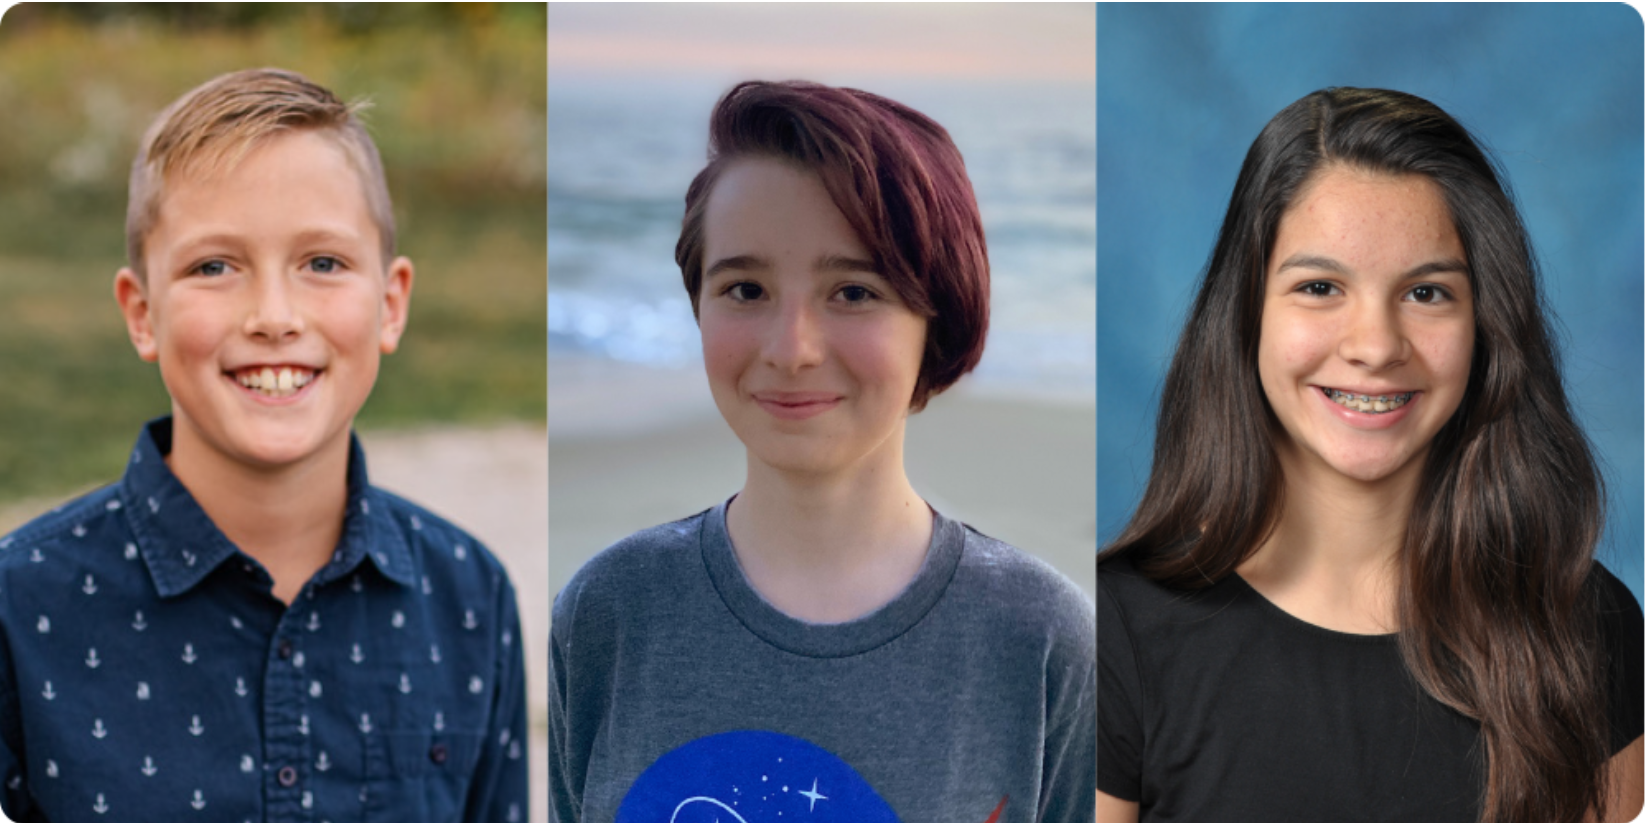 From left to right, students Austin Pritts, Taia Saurer, and Amanda Gutierrez have been named the winners of the Moon Pod Essay Contest for their creative visions of a journey to the Moon.